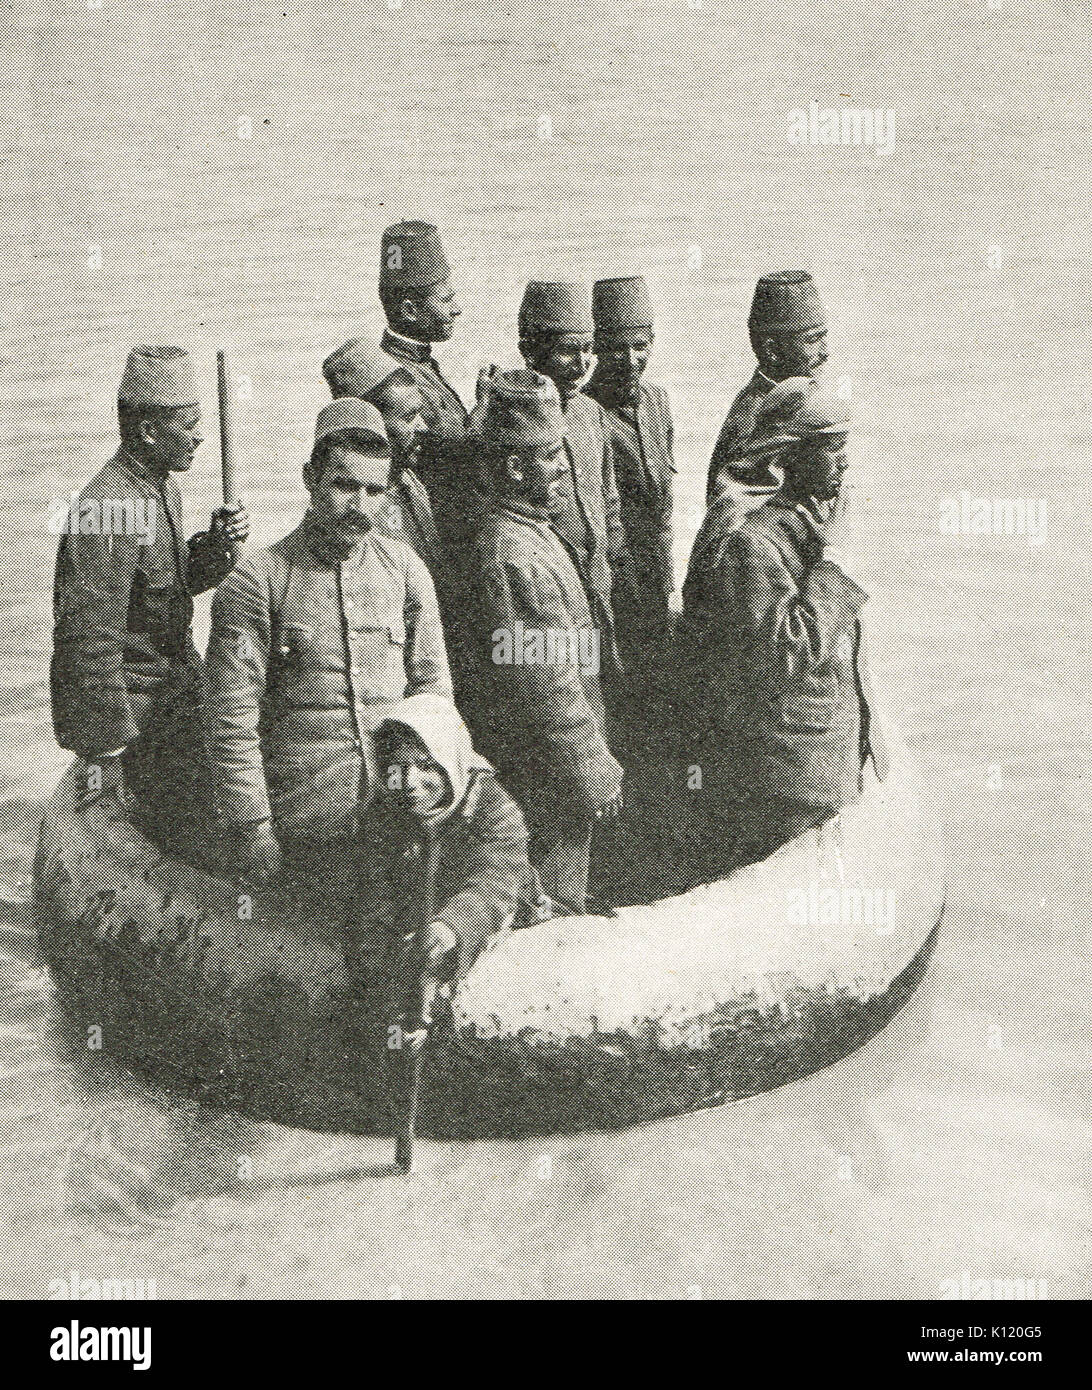 Turkish soldiers being ferried across a river in a Kuphar, Mesopotamian campaign, WW1 Stock Photo